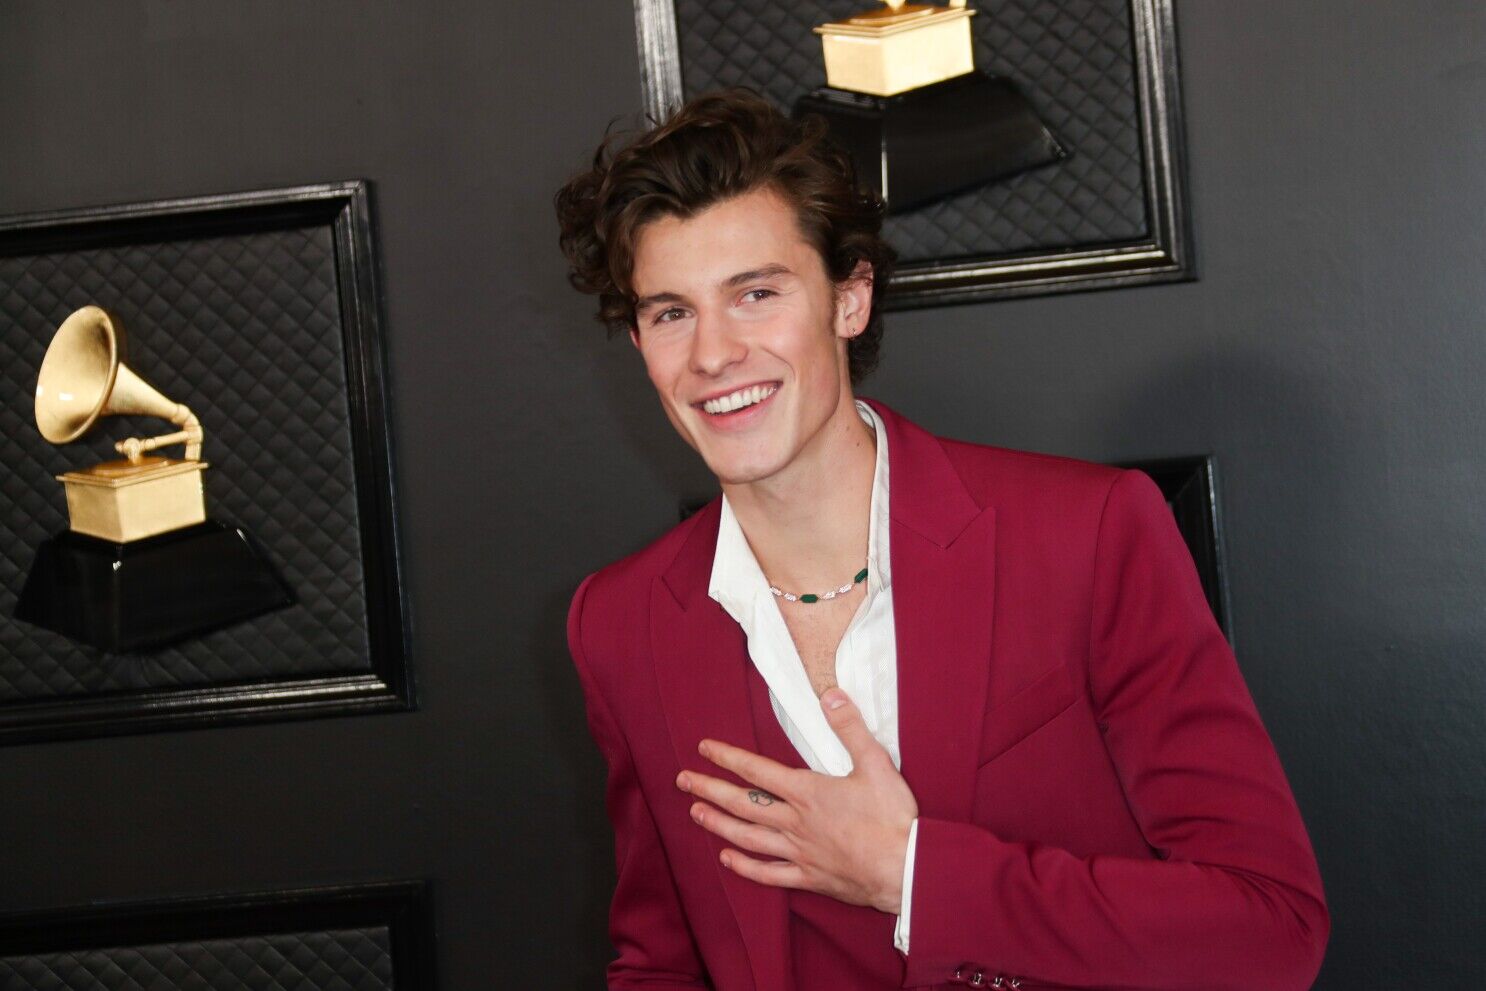 Shawn Mendes cancels remaining tour dates to focus on mental health